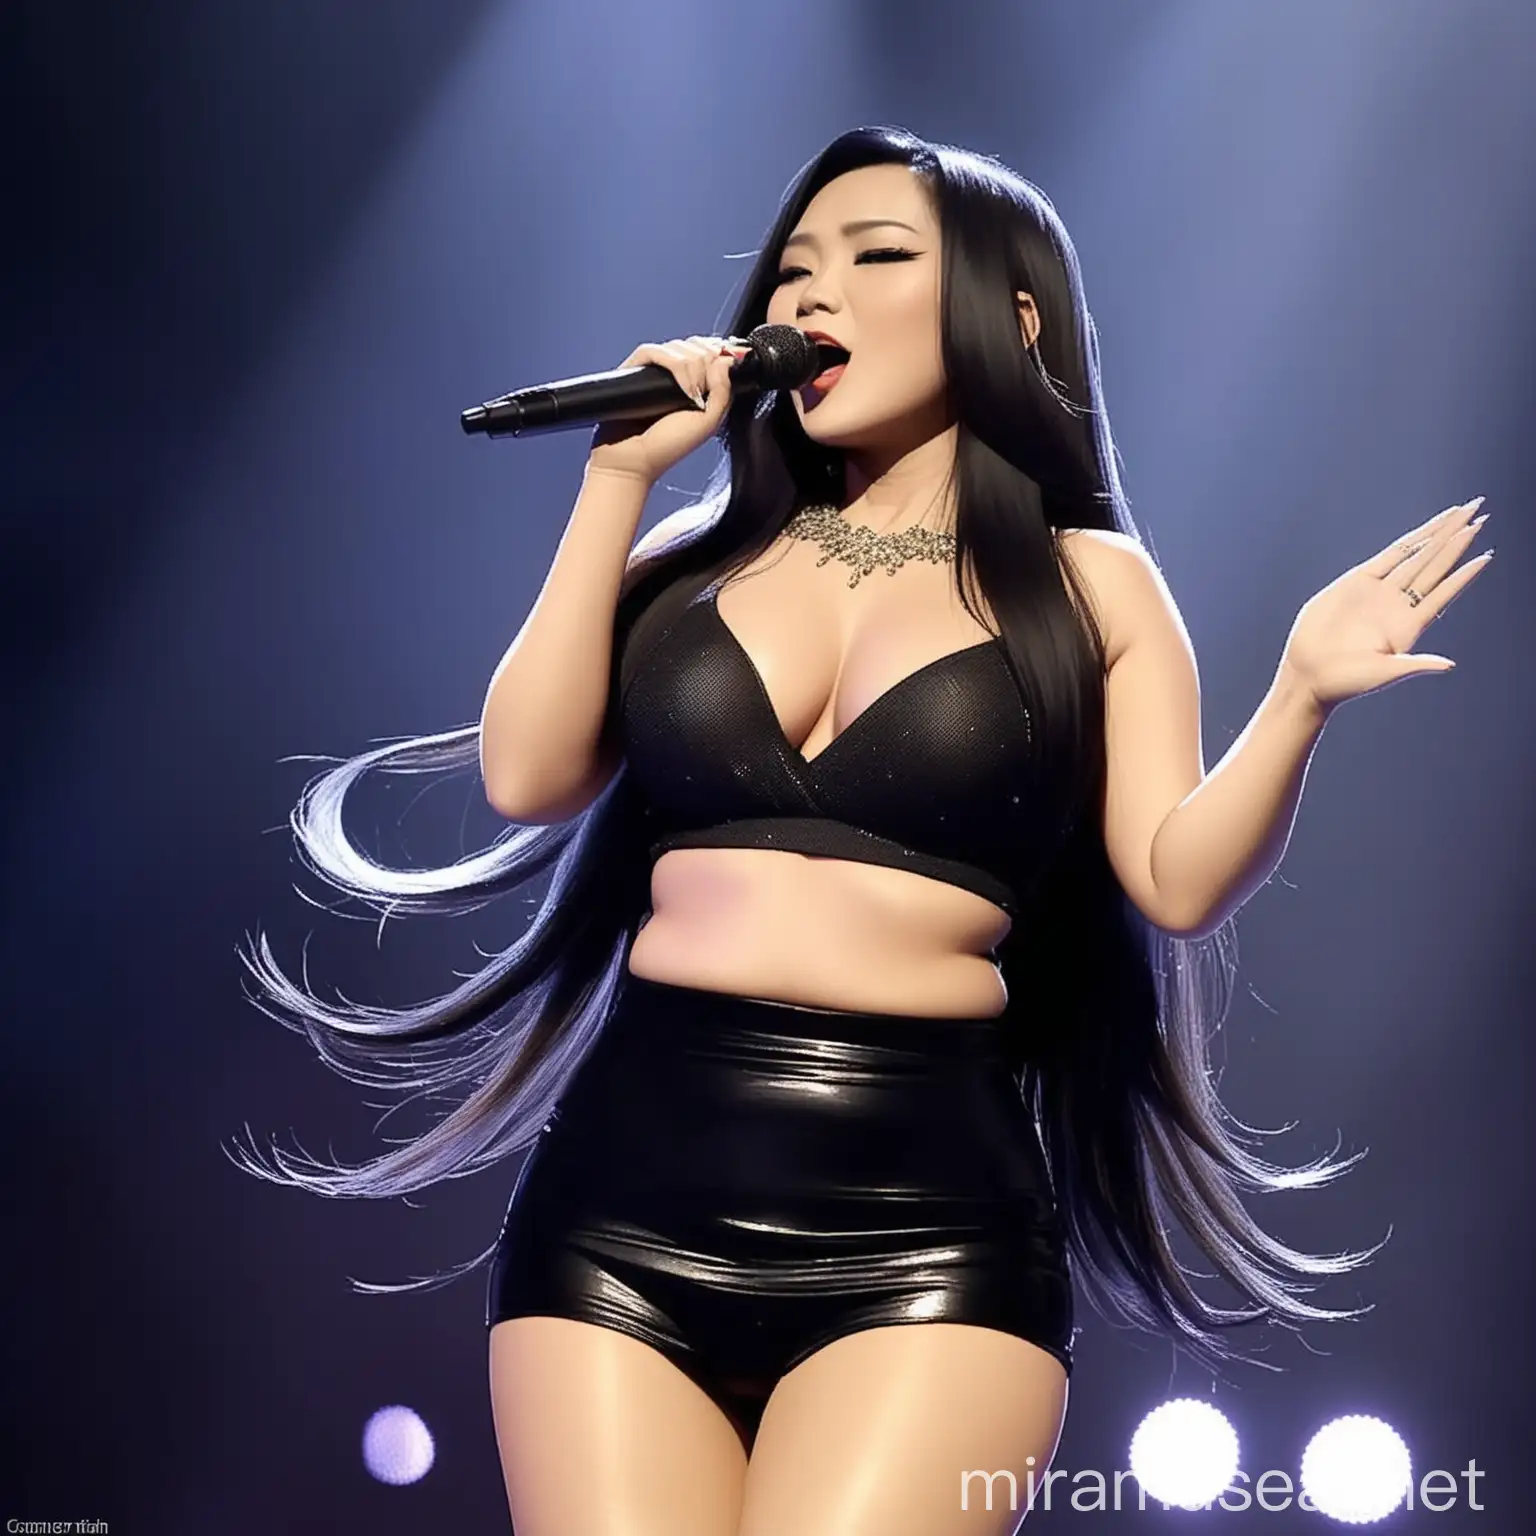 The beautiful Indonesian female singer with long hair in her thirties performed a concert wearing a sexy top that is open at the top no brah